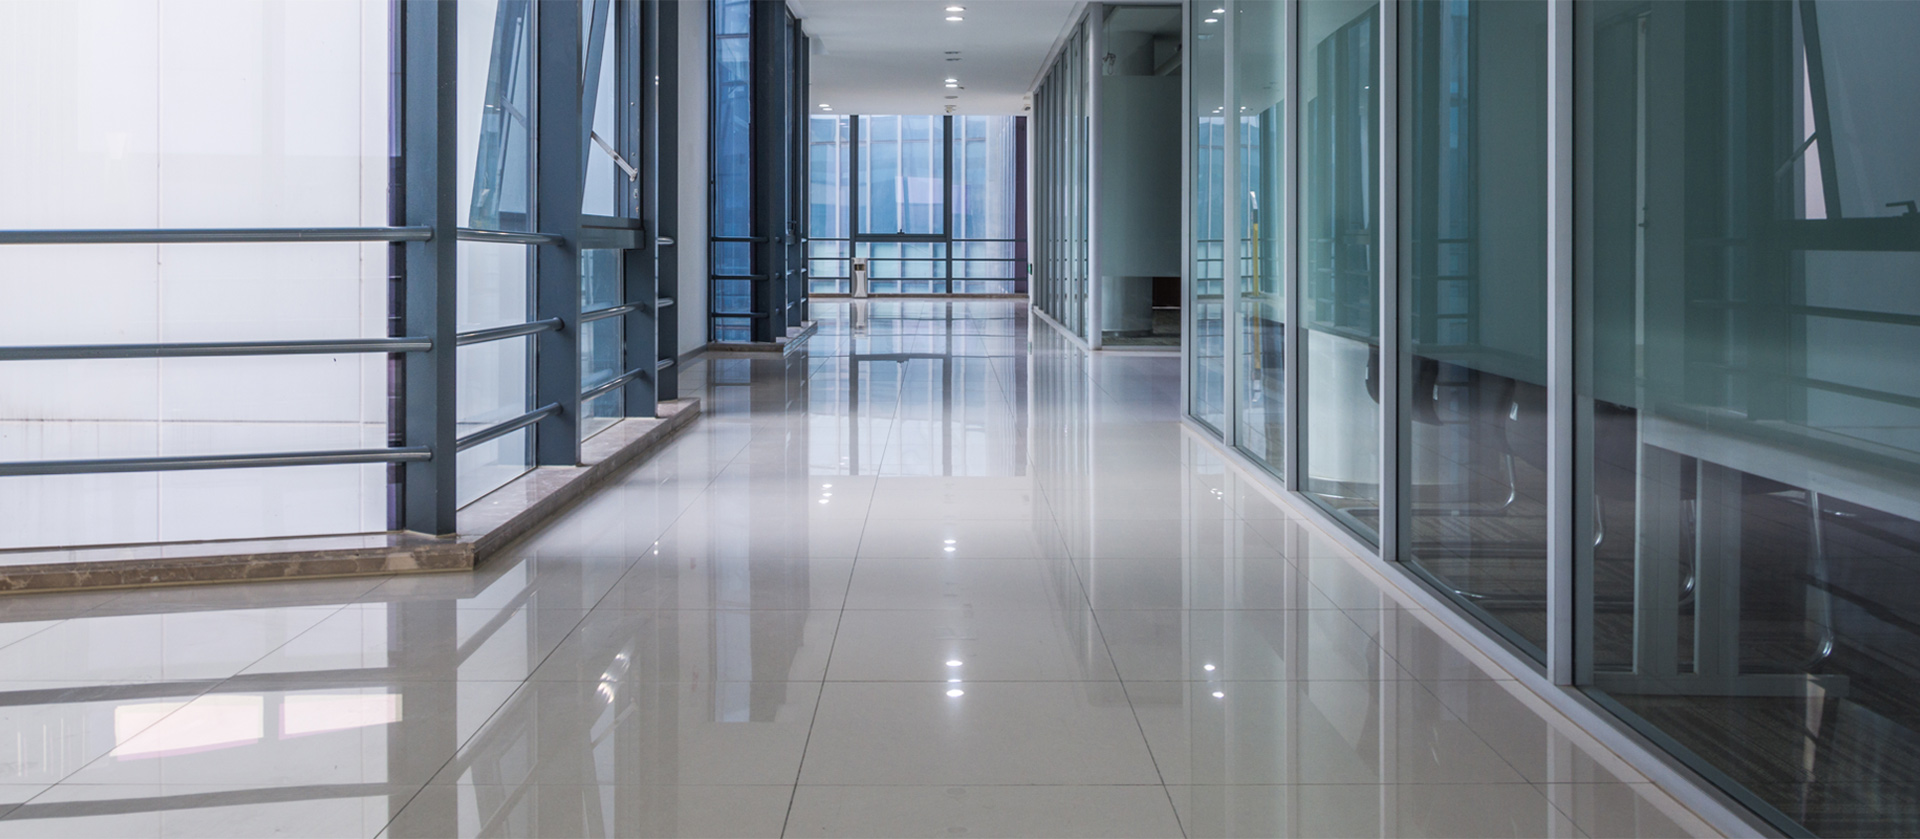 A long hallway with glass walls and white tile floors.